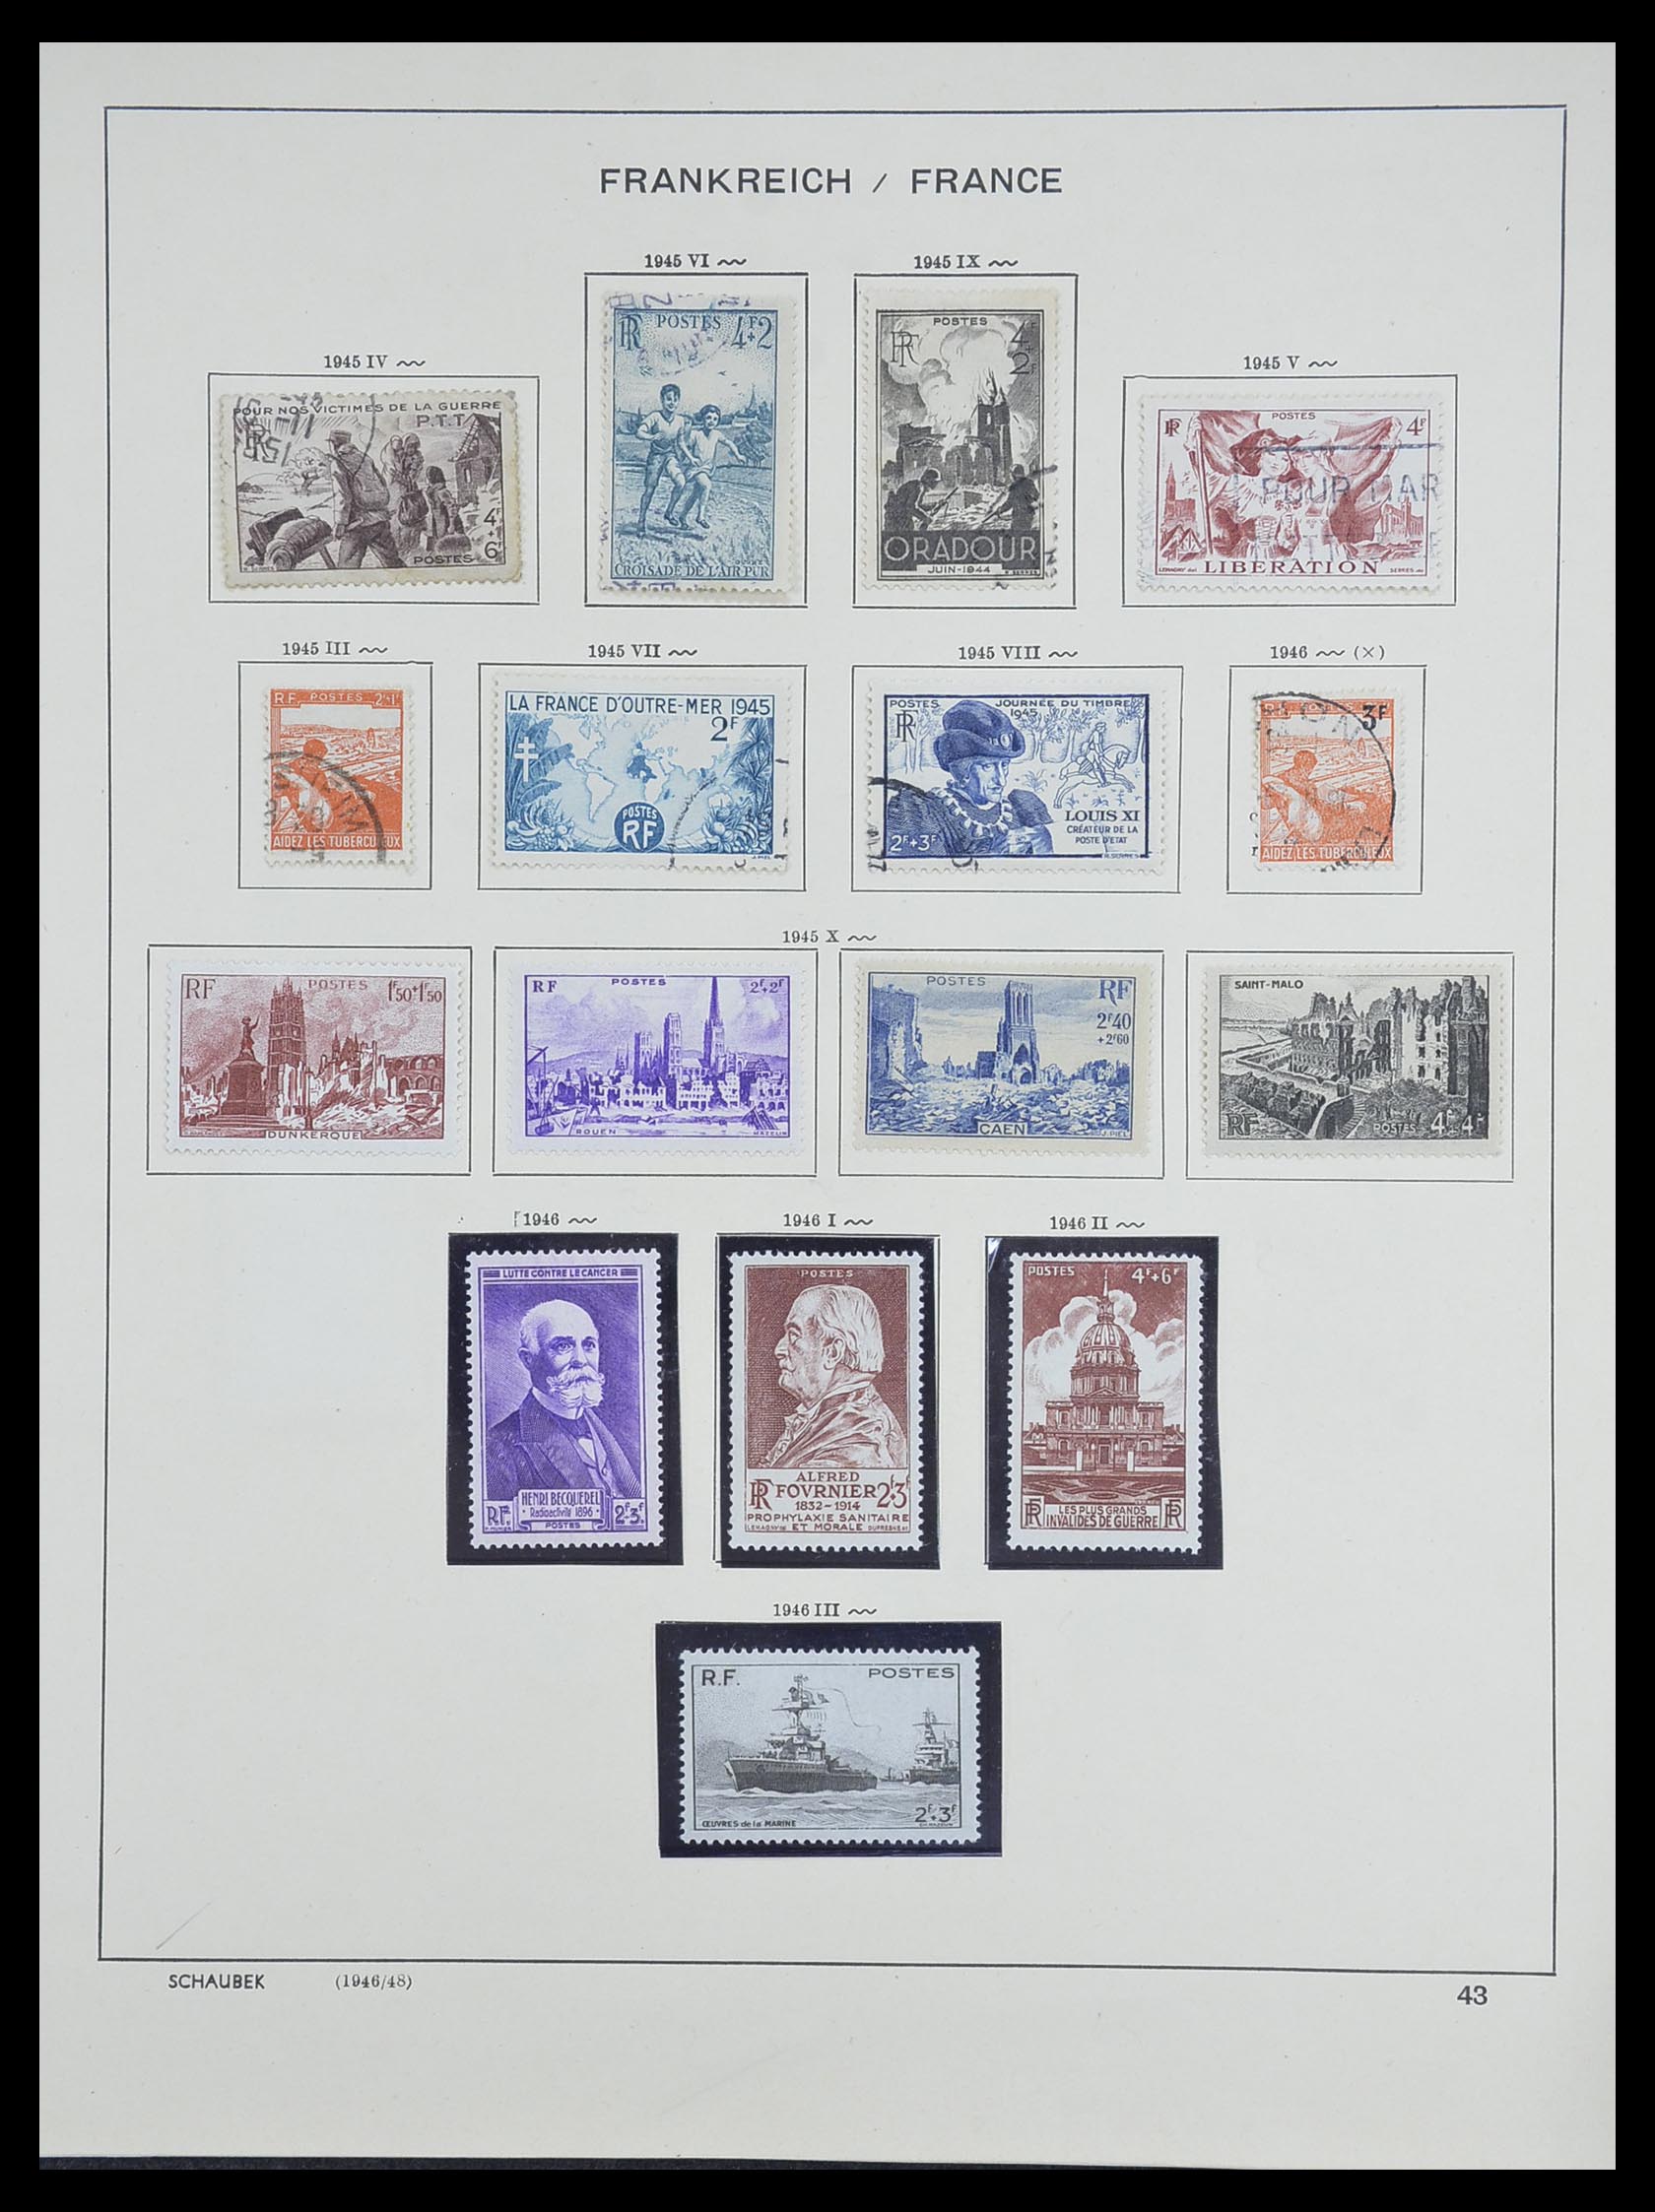 33919 036 - Stamp collection 33919 France 1849-1946.